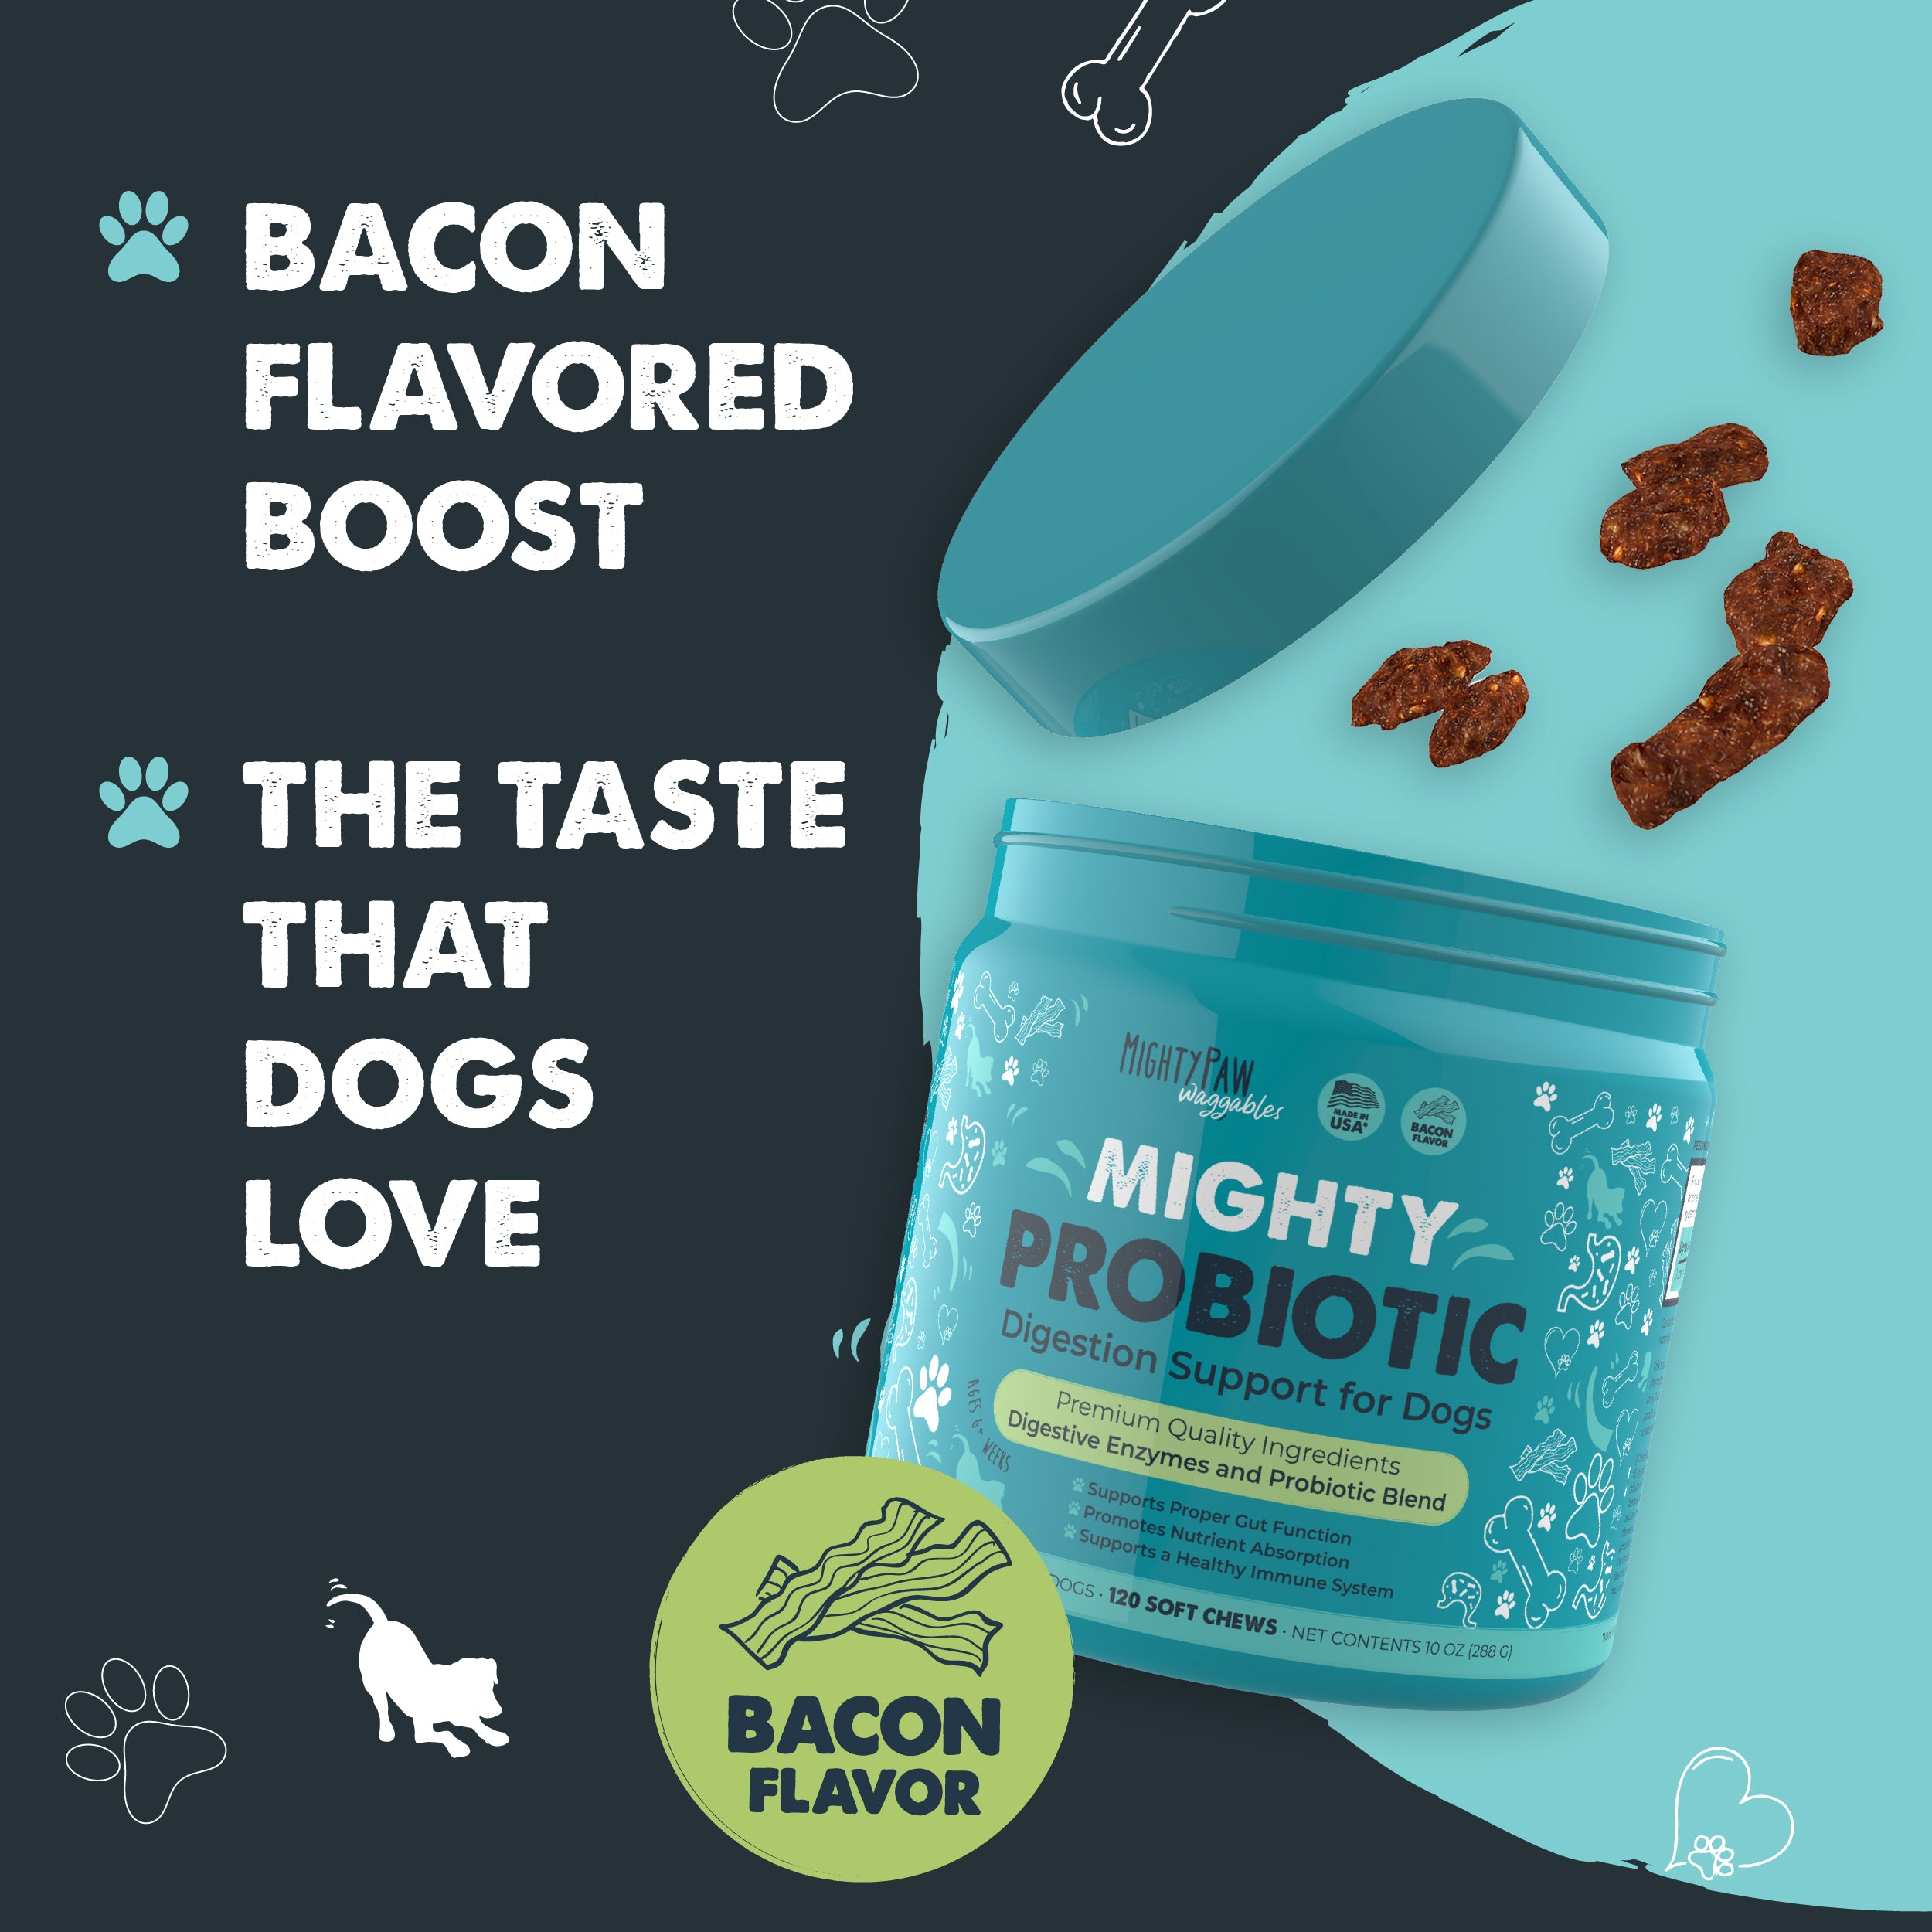 Mighty Probiotic Chews for Dogs | Digestion Support